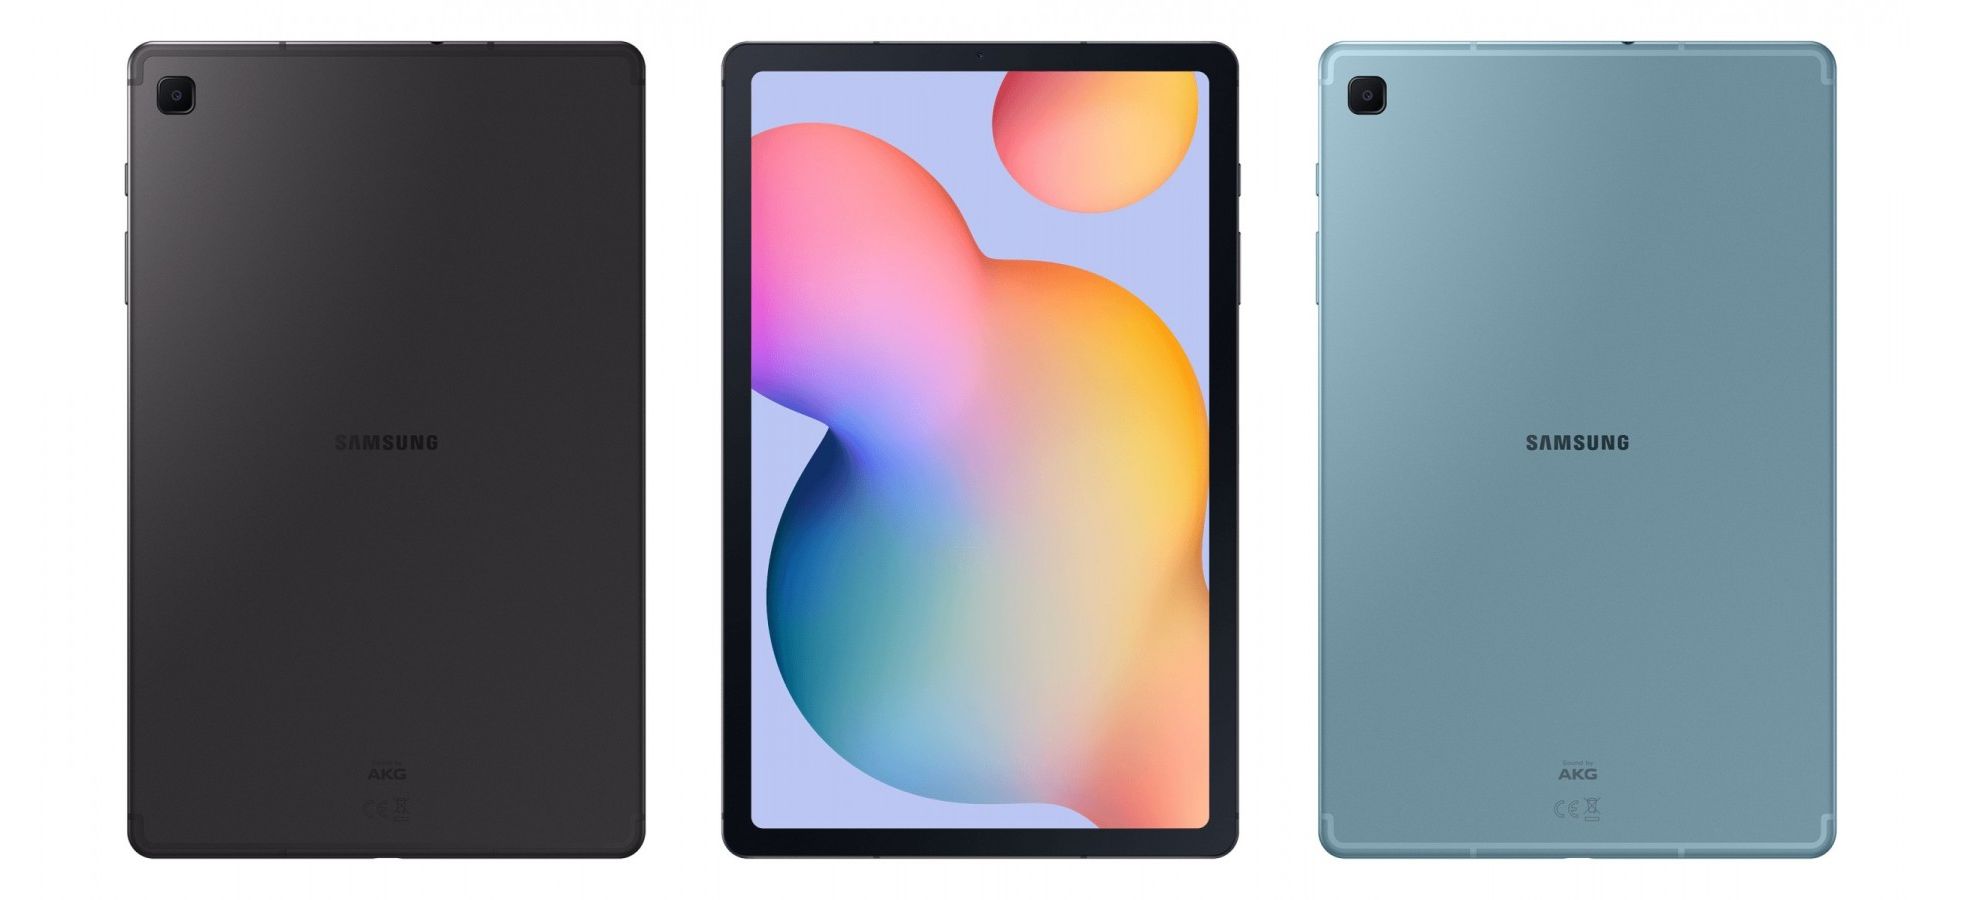 Scissors Postal code Consignment Samsung Galaxy Tab S6 Lite renders and key specifications leaked -  Gizmochina